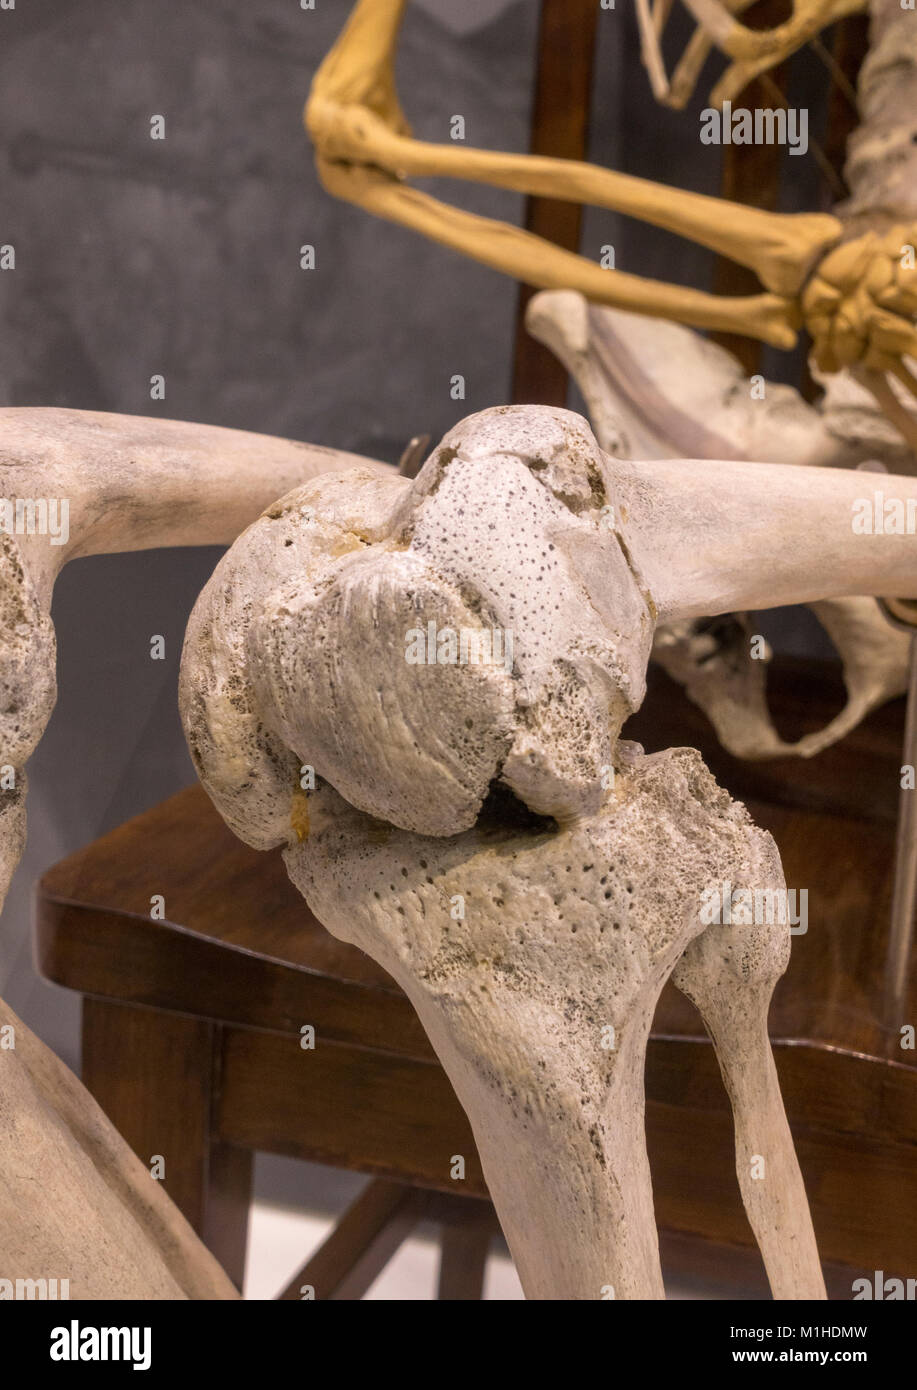 The oleft knee joint of Peter Cluckeys skeleton, who died of chronic rheumatism, National Museum of Health and Medicine, Silver Spring, MD, USA. Stock Photo